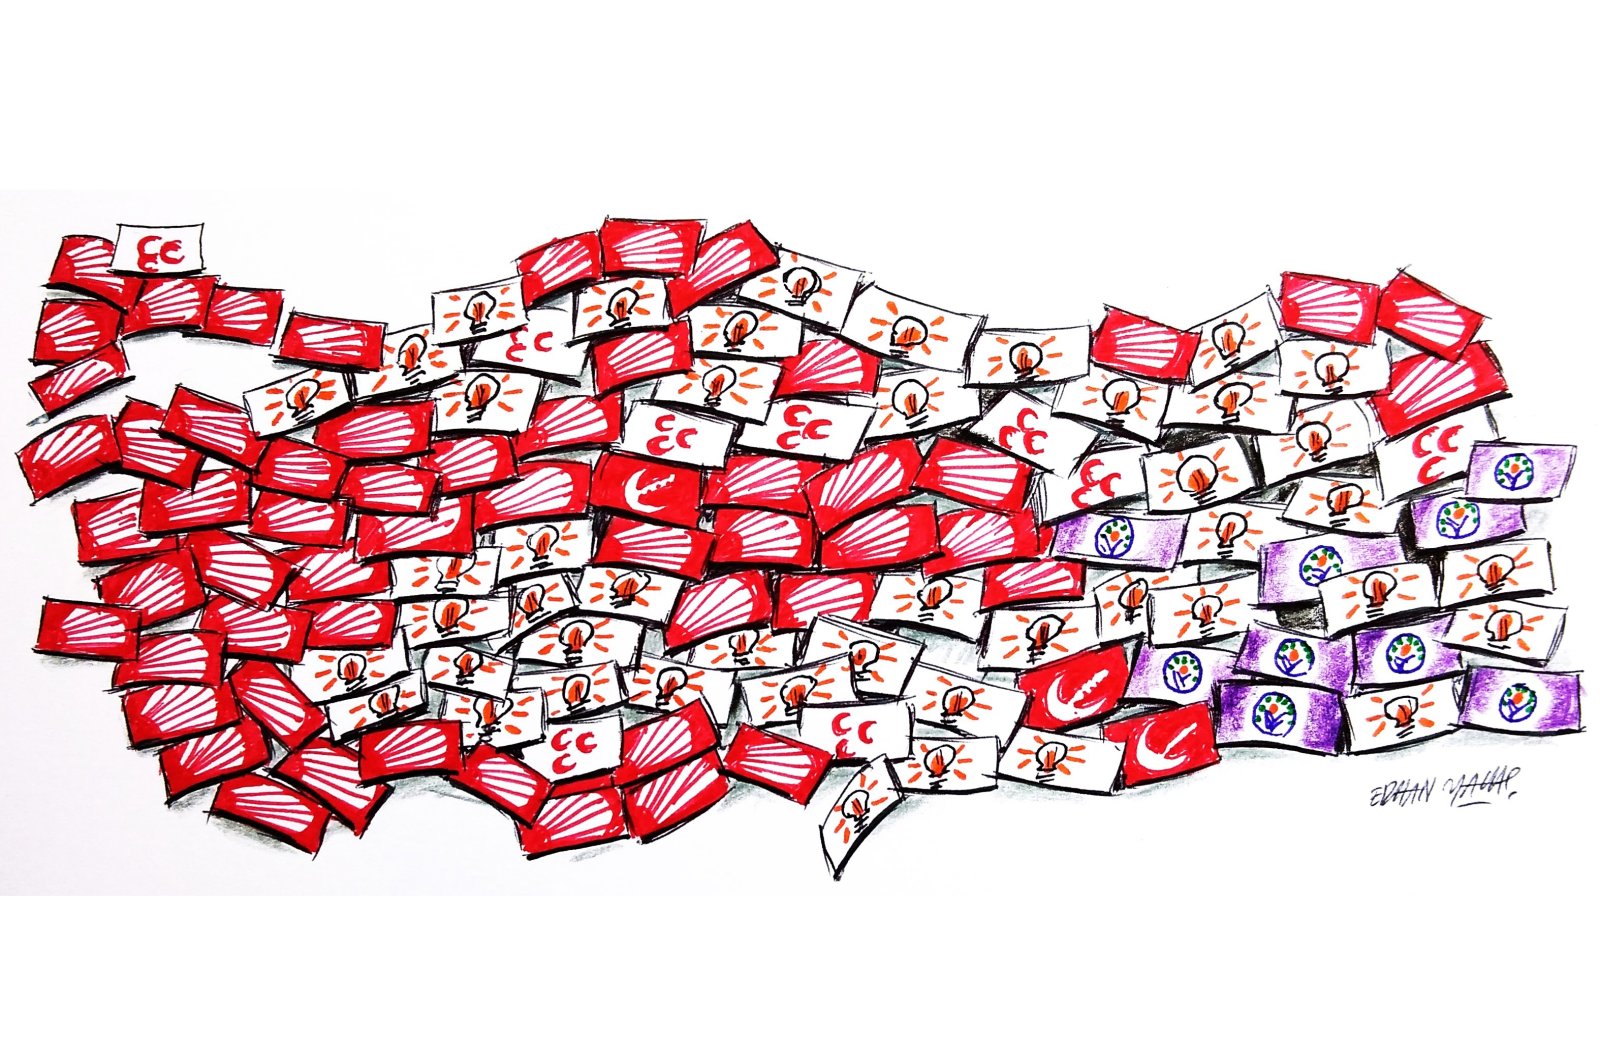 &quot;Based on the election results, it is possible to argue that social programs, candidates and the backlash against economic challenges played a bigger role than investments and projects on Sunday.&quot; (Illustration by Erhan Yalvaç)